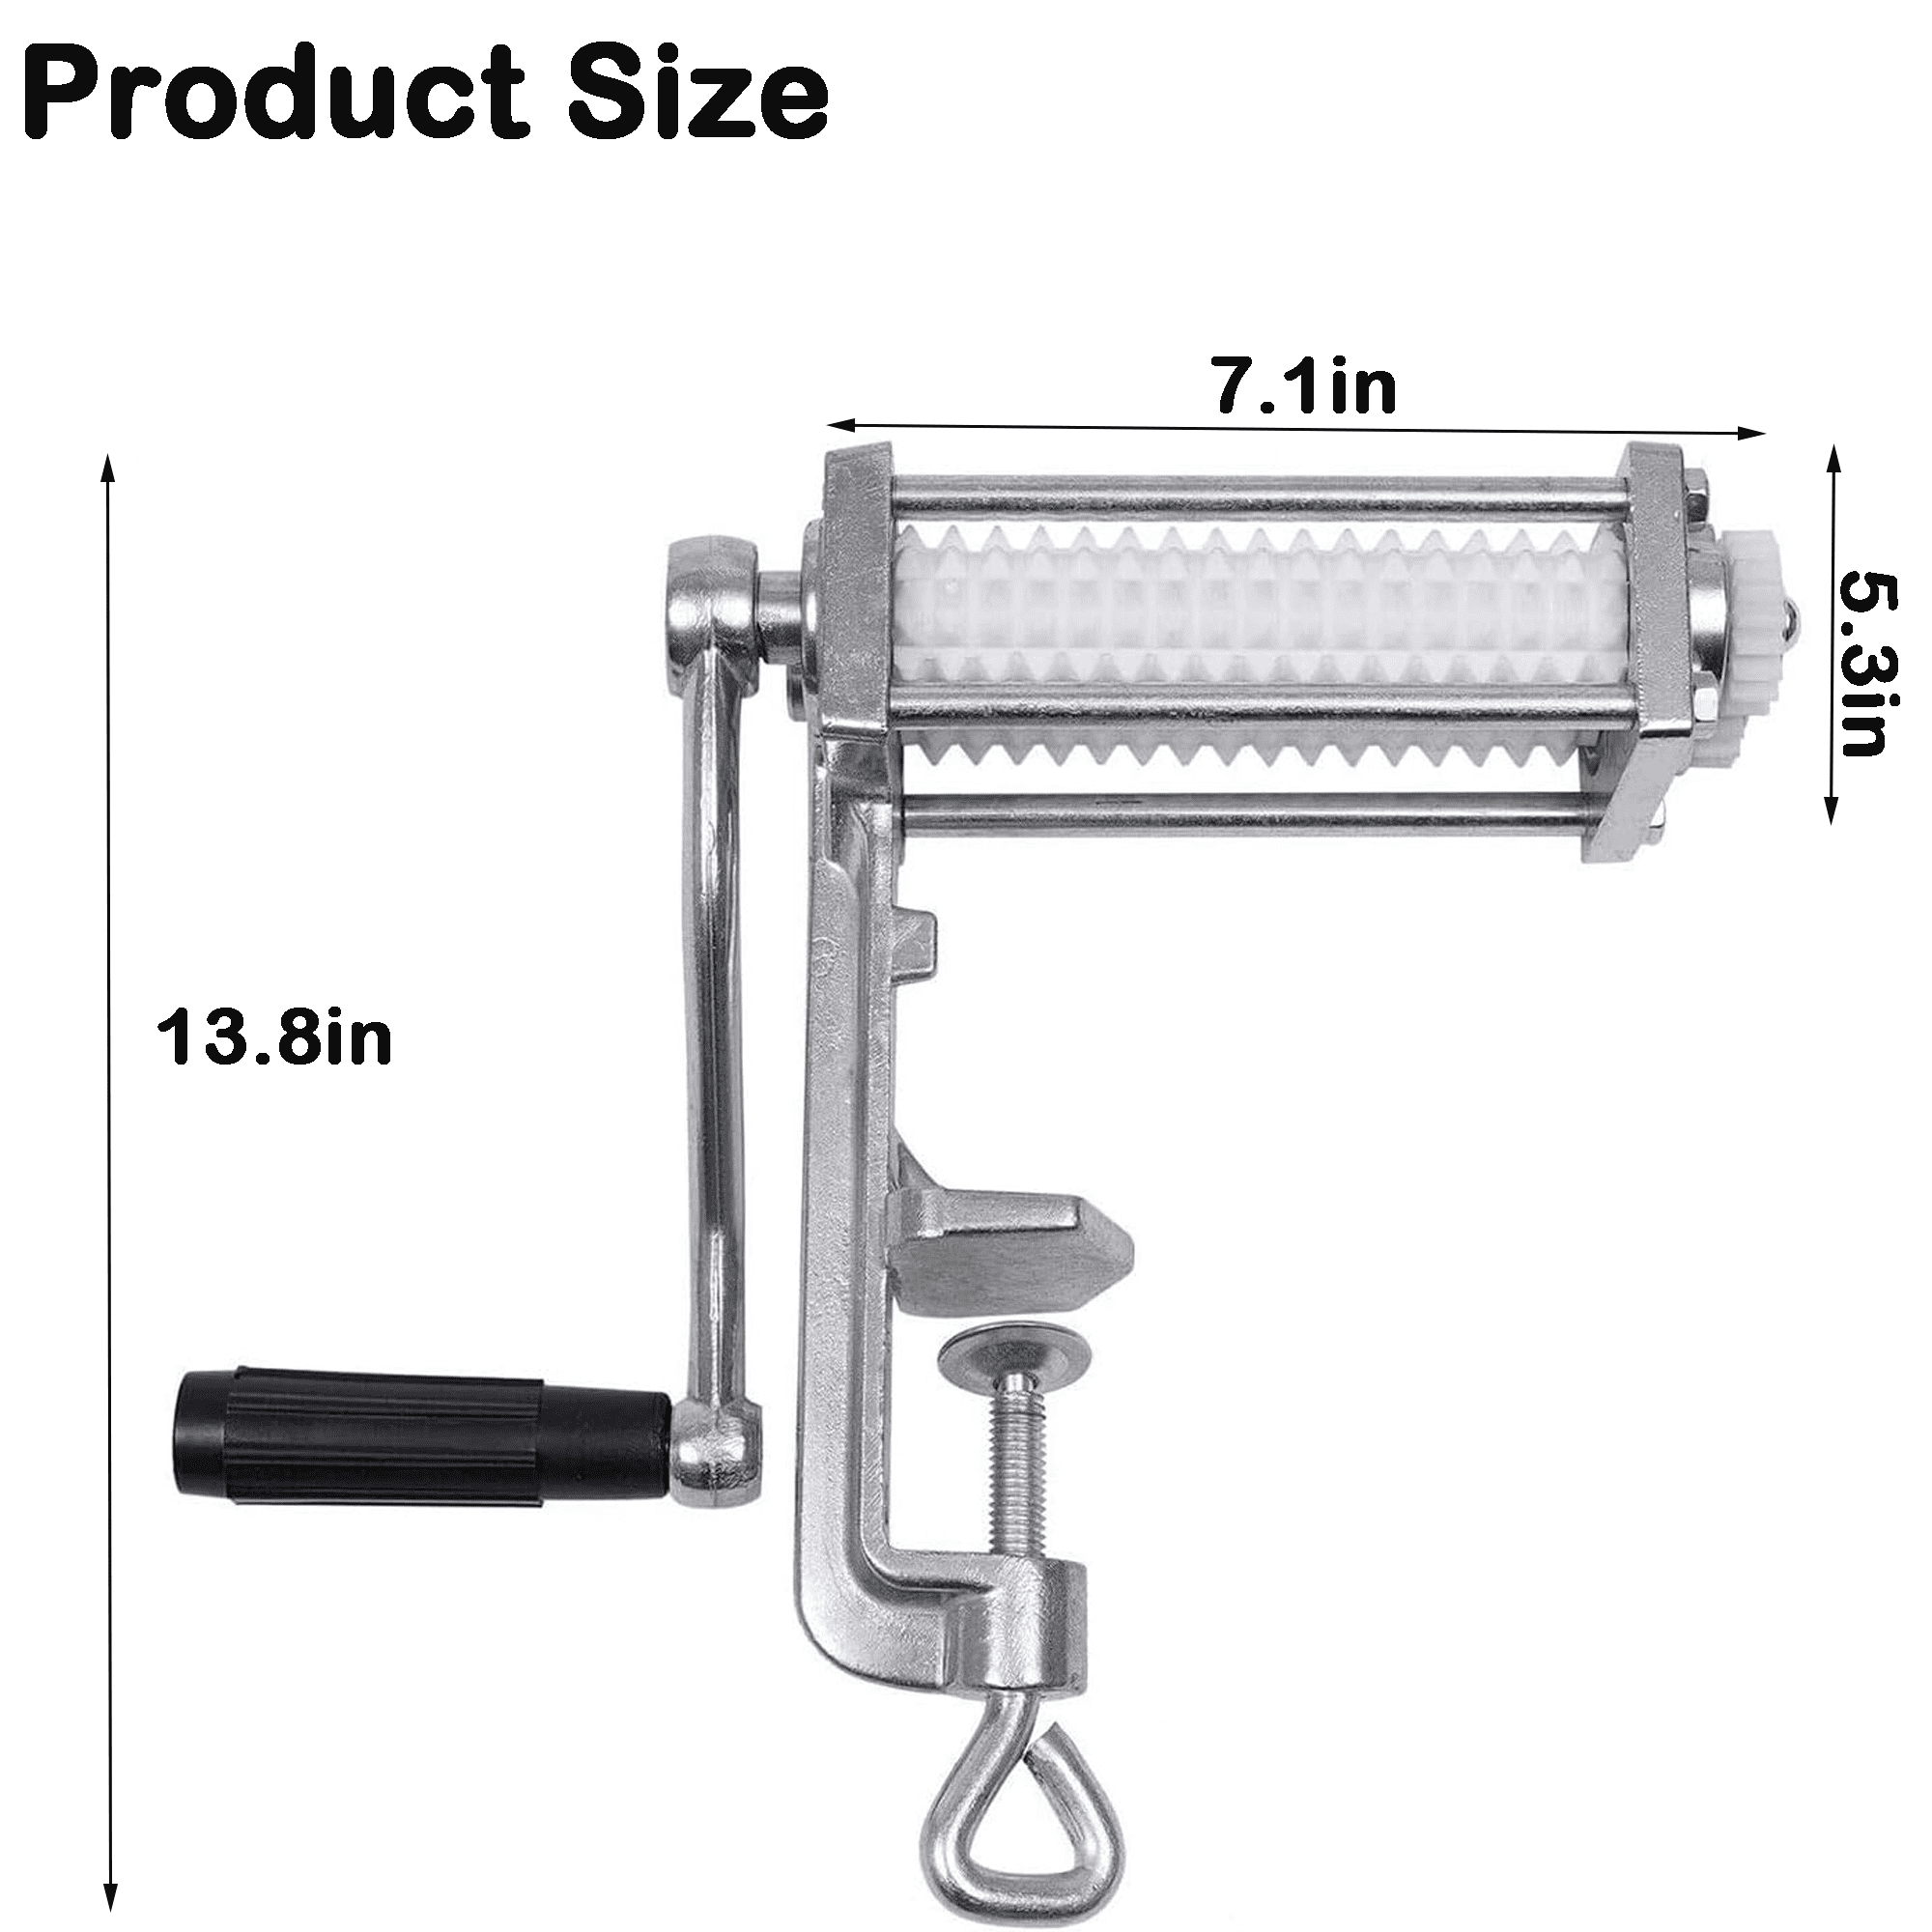 Yiyibyus Manual Meat Tenderizer Tool 2 Rollers Meat Grinder Cuber Steak Machine Stainless Steel, Size: 7.1, Silver